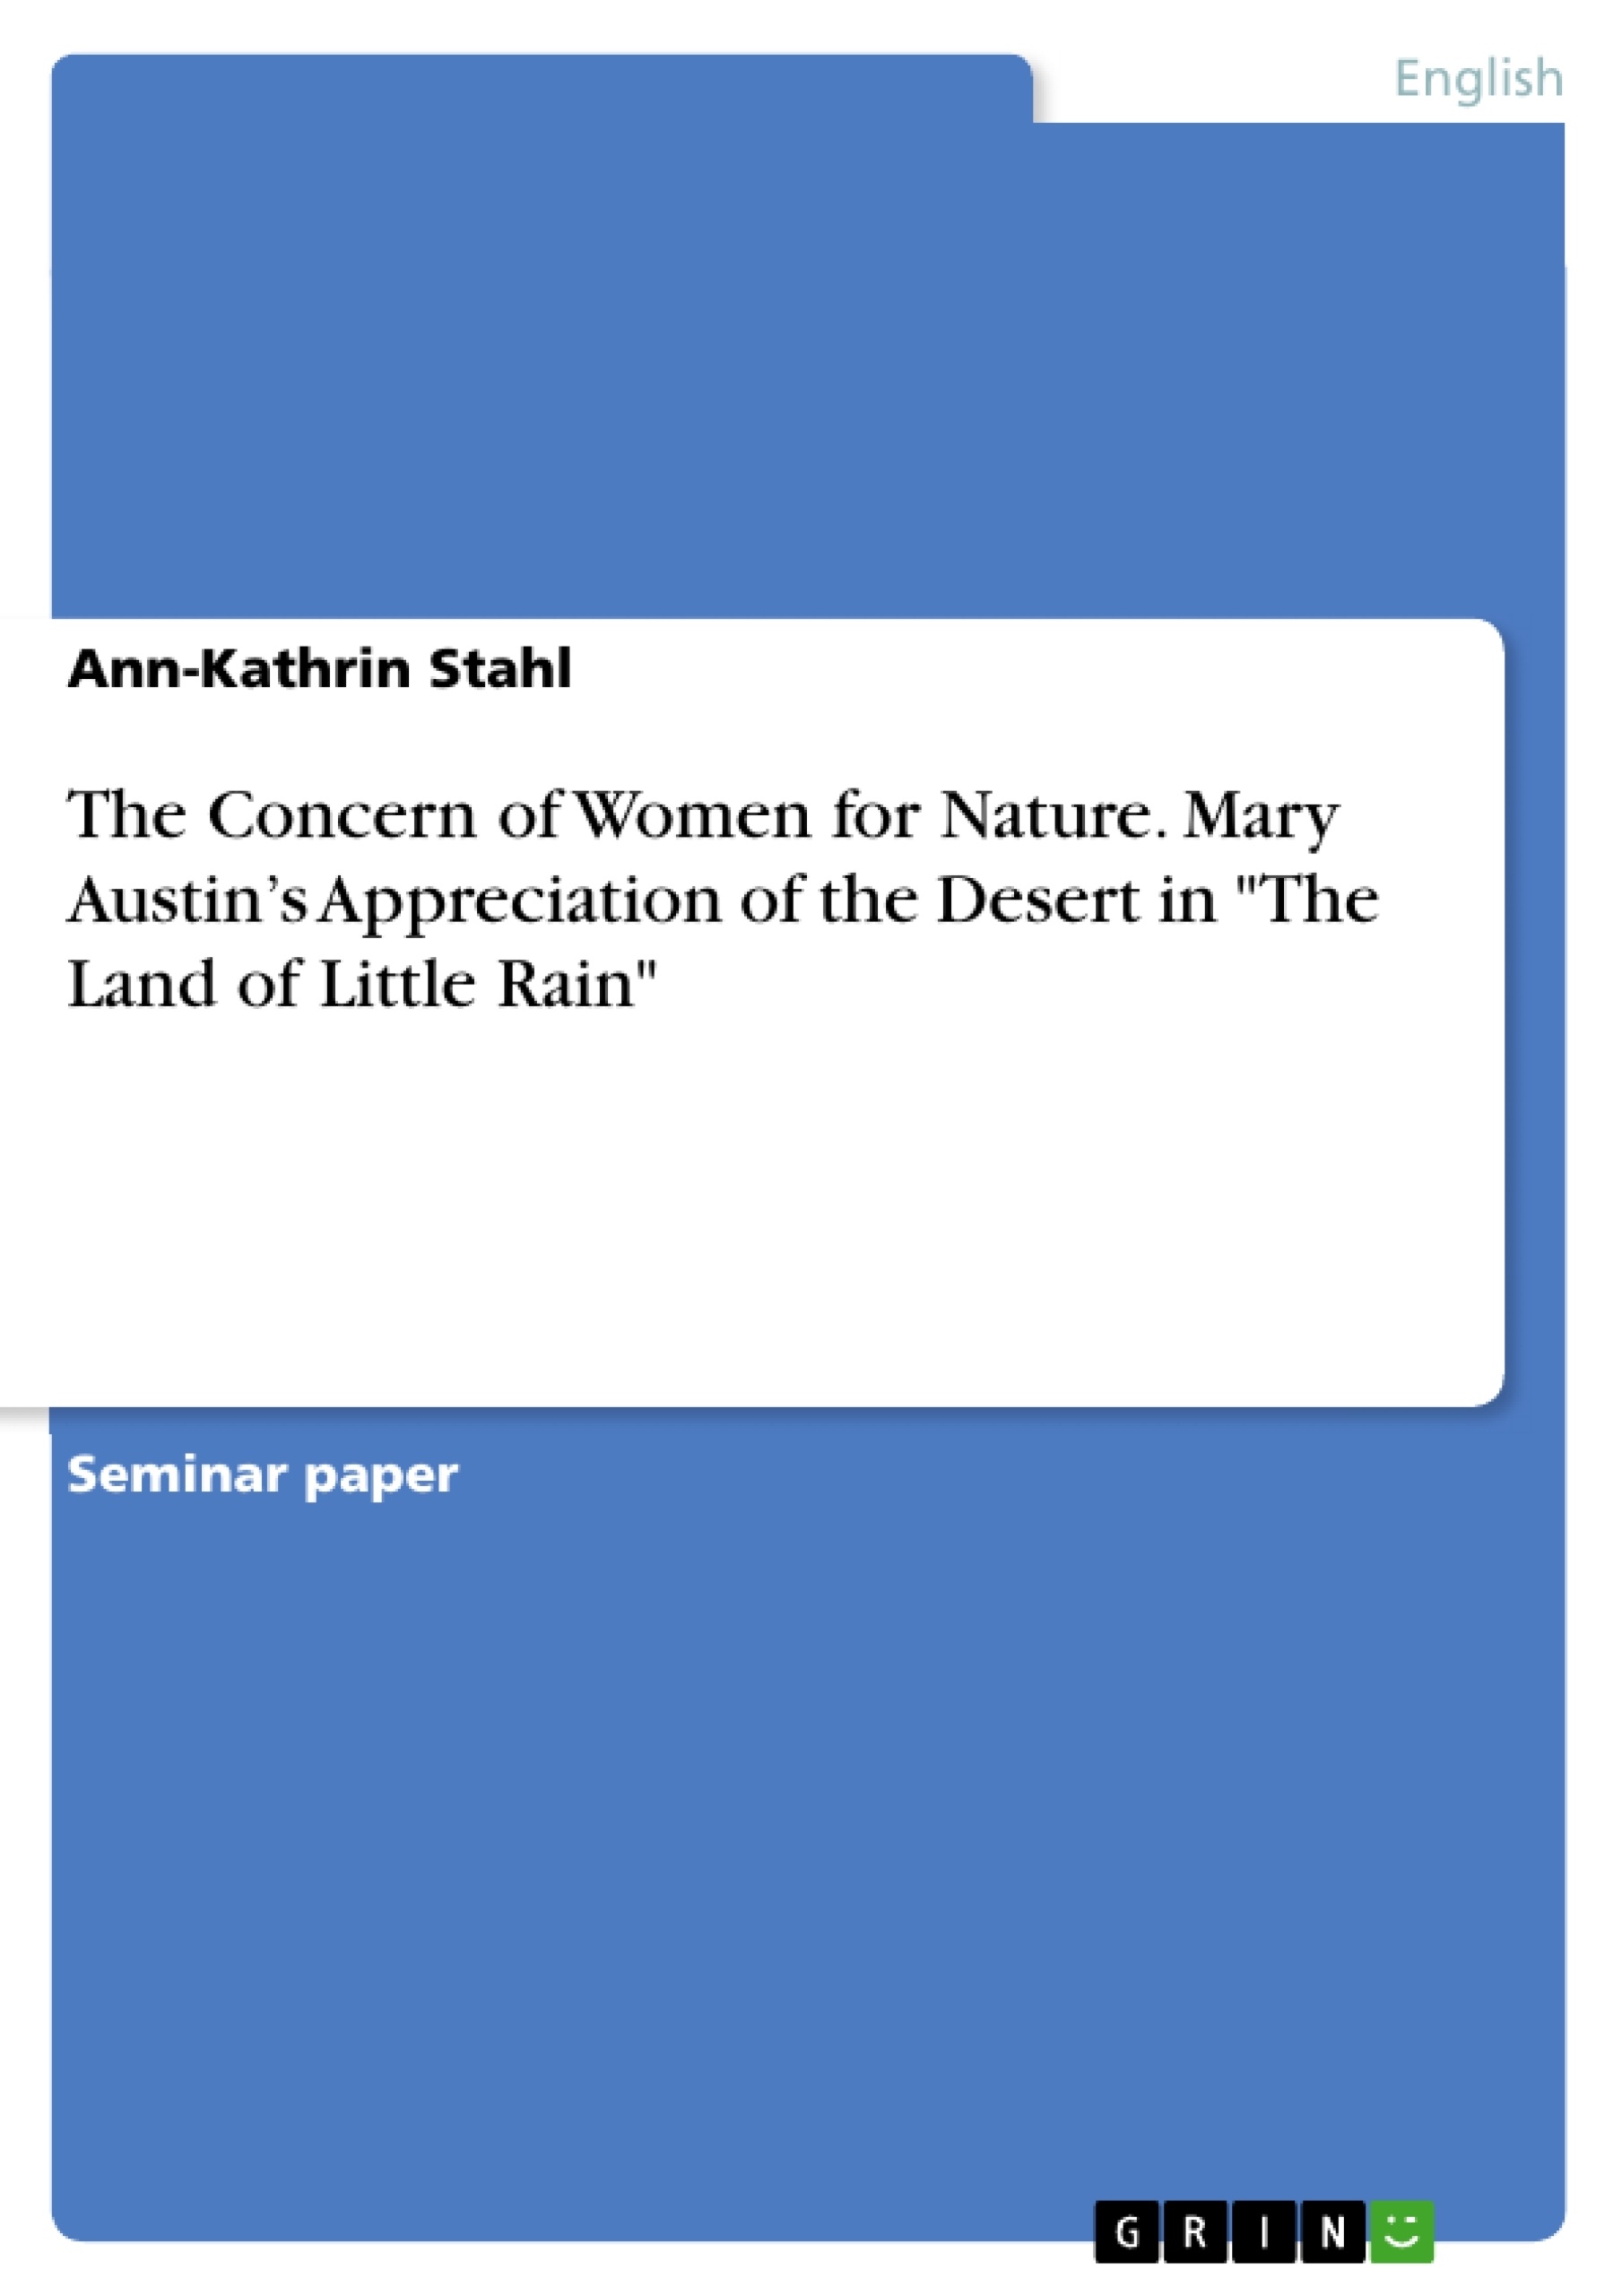 Title: The Concern of Women for Nature. Mary Austin’s Appreciation of the Desert in "The Land of Little Rain"